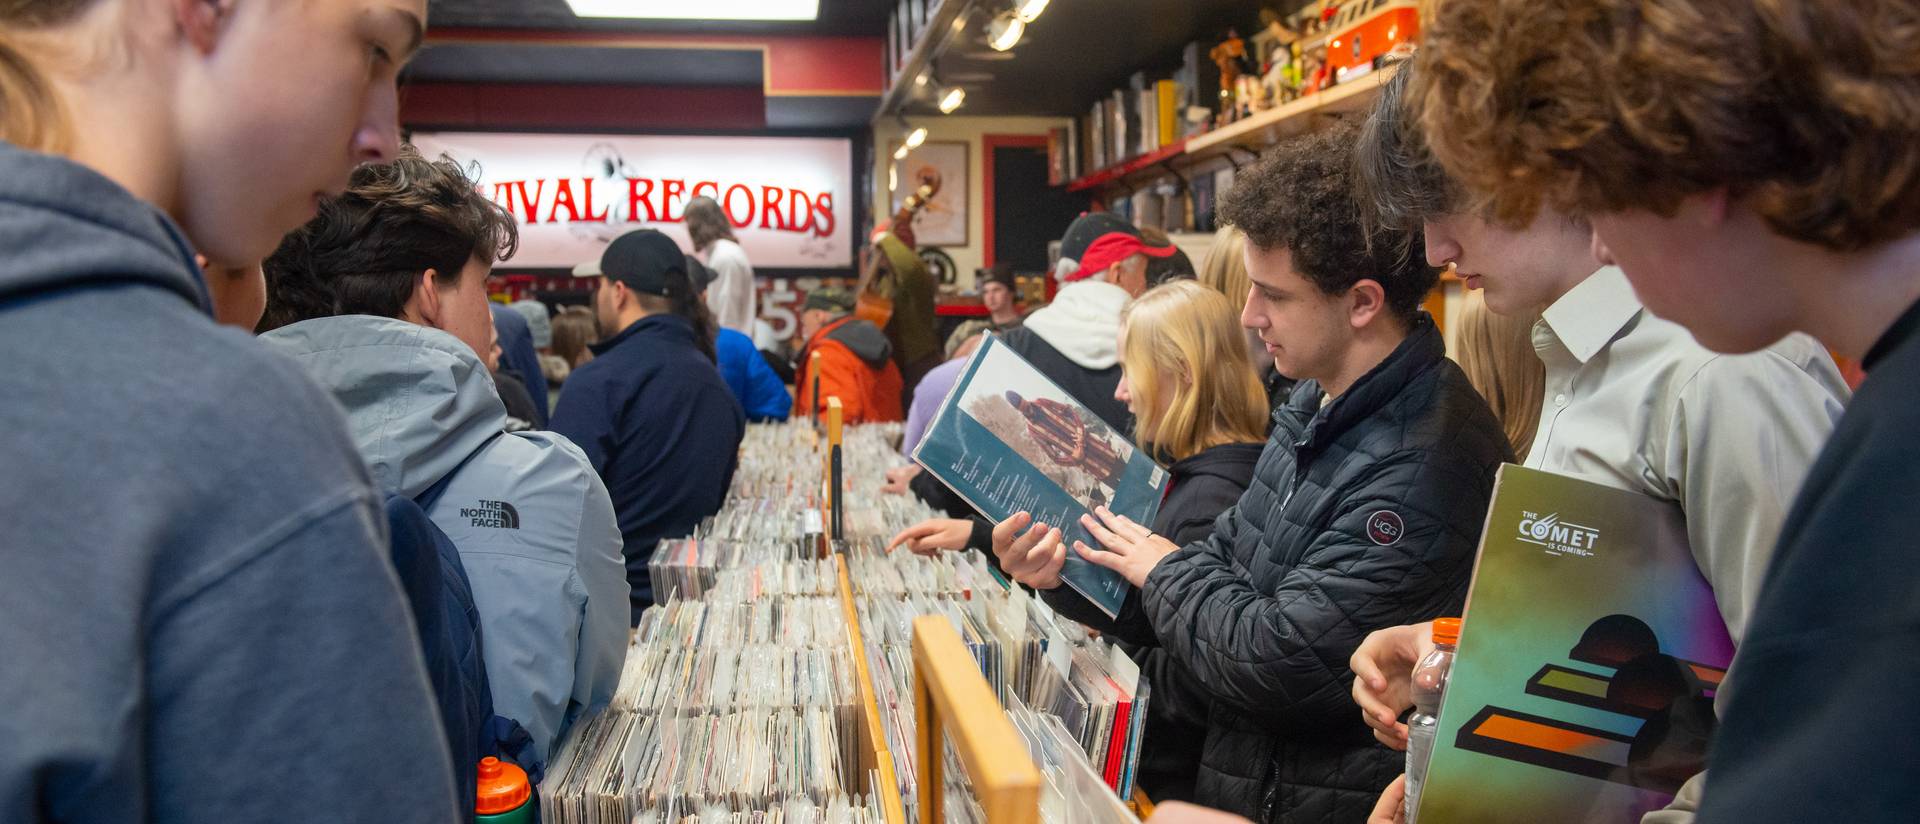 customers checking out vinyl albums at Revival Records store